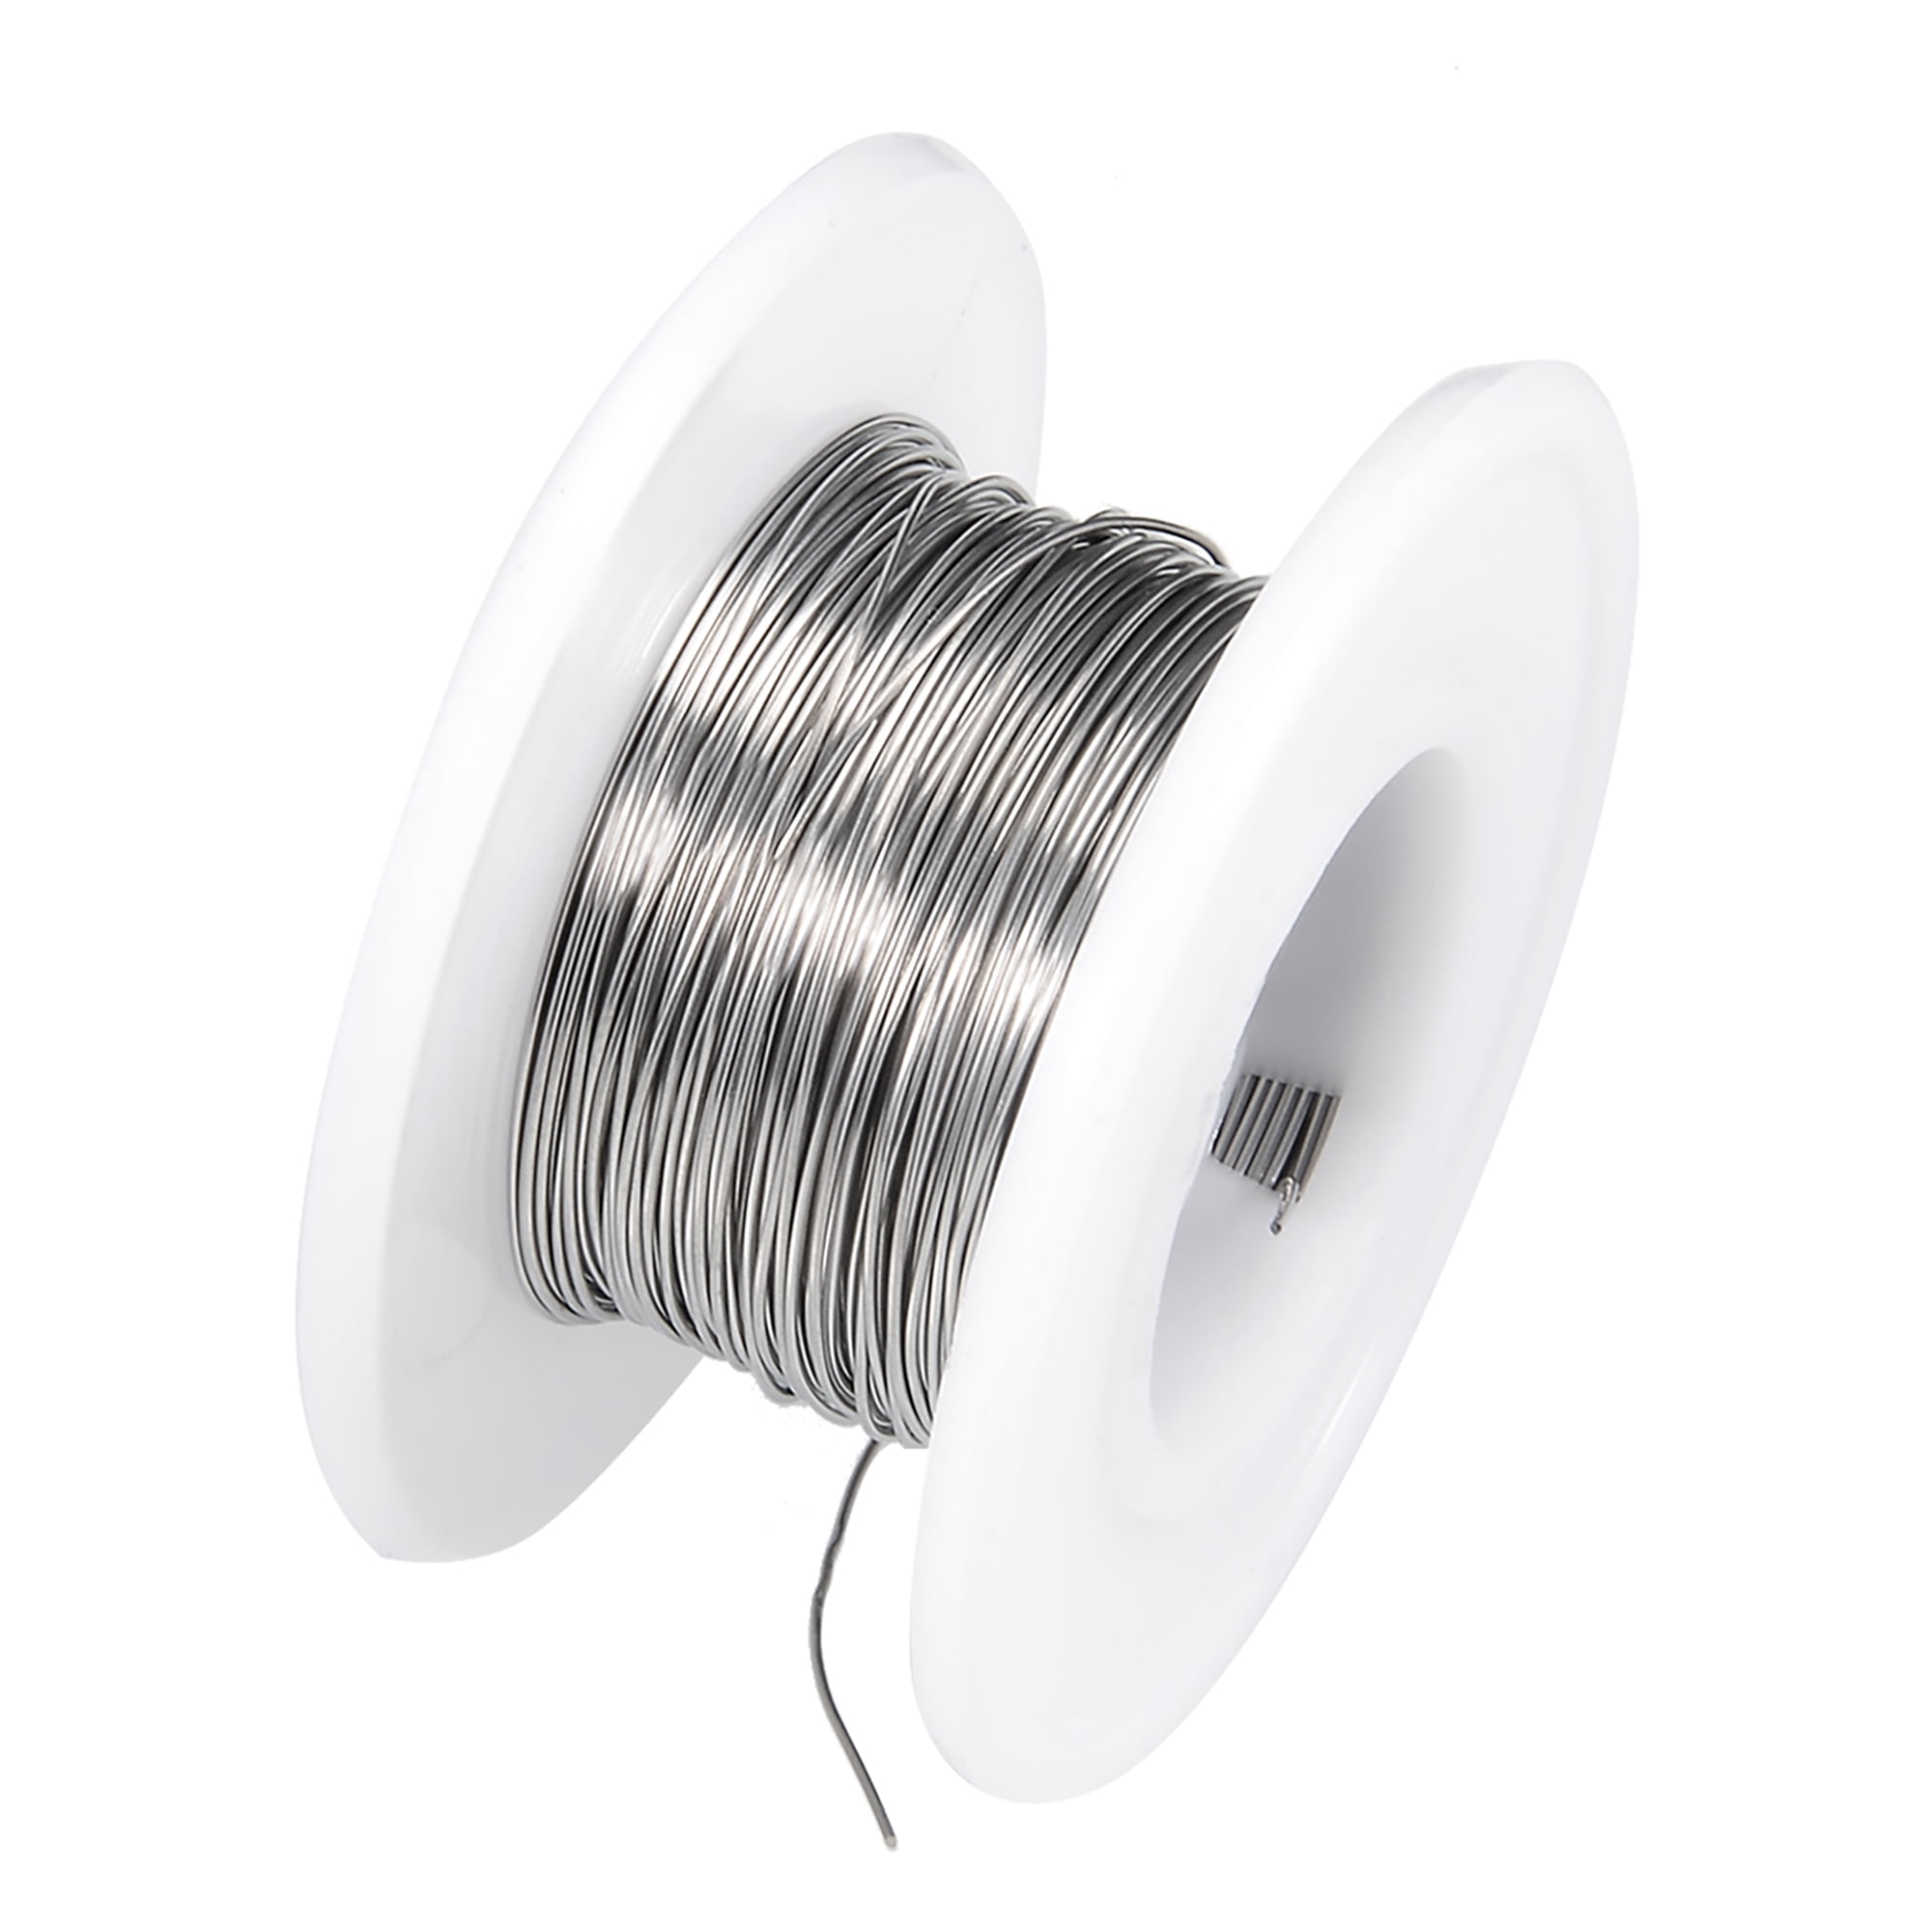 27 AWG Gauge Resistance Wire Wrapping, 33ft Nichrome Heating